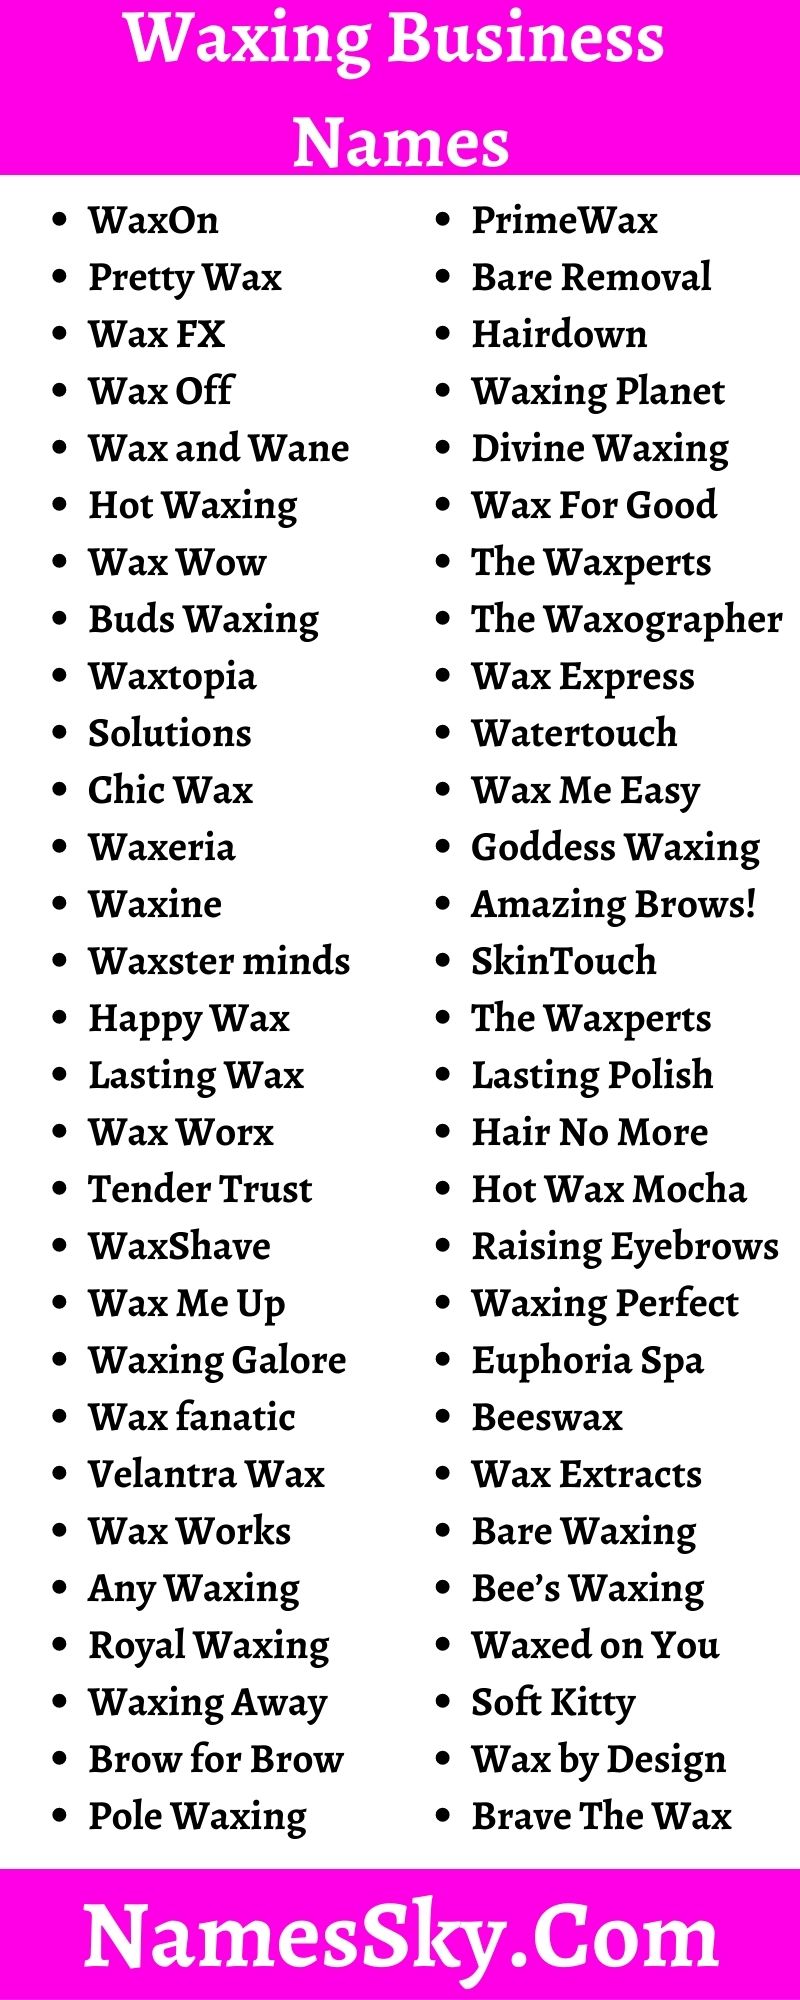 Best Waxing Business Names For Your New Startup